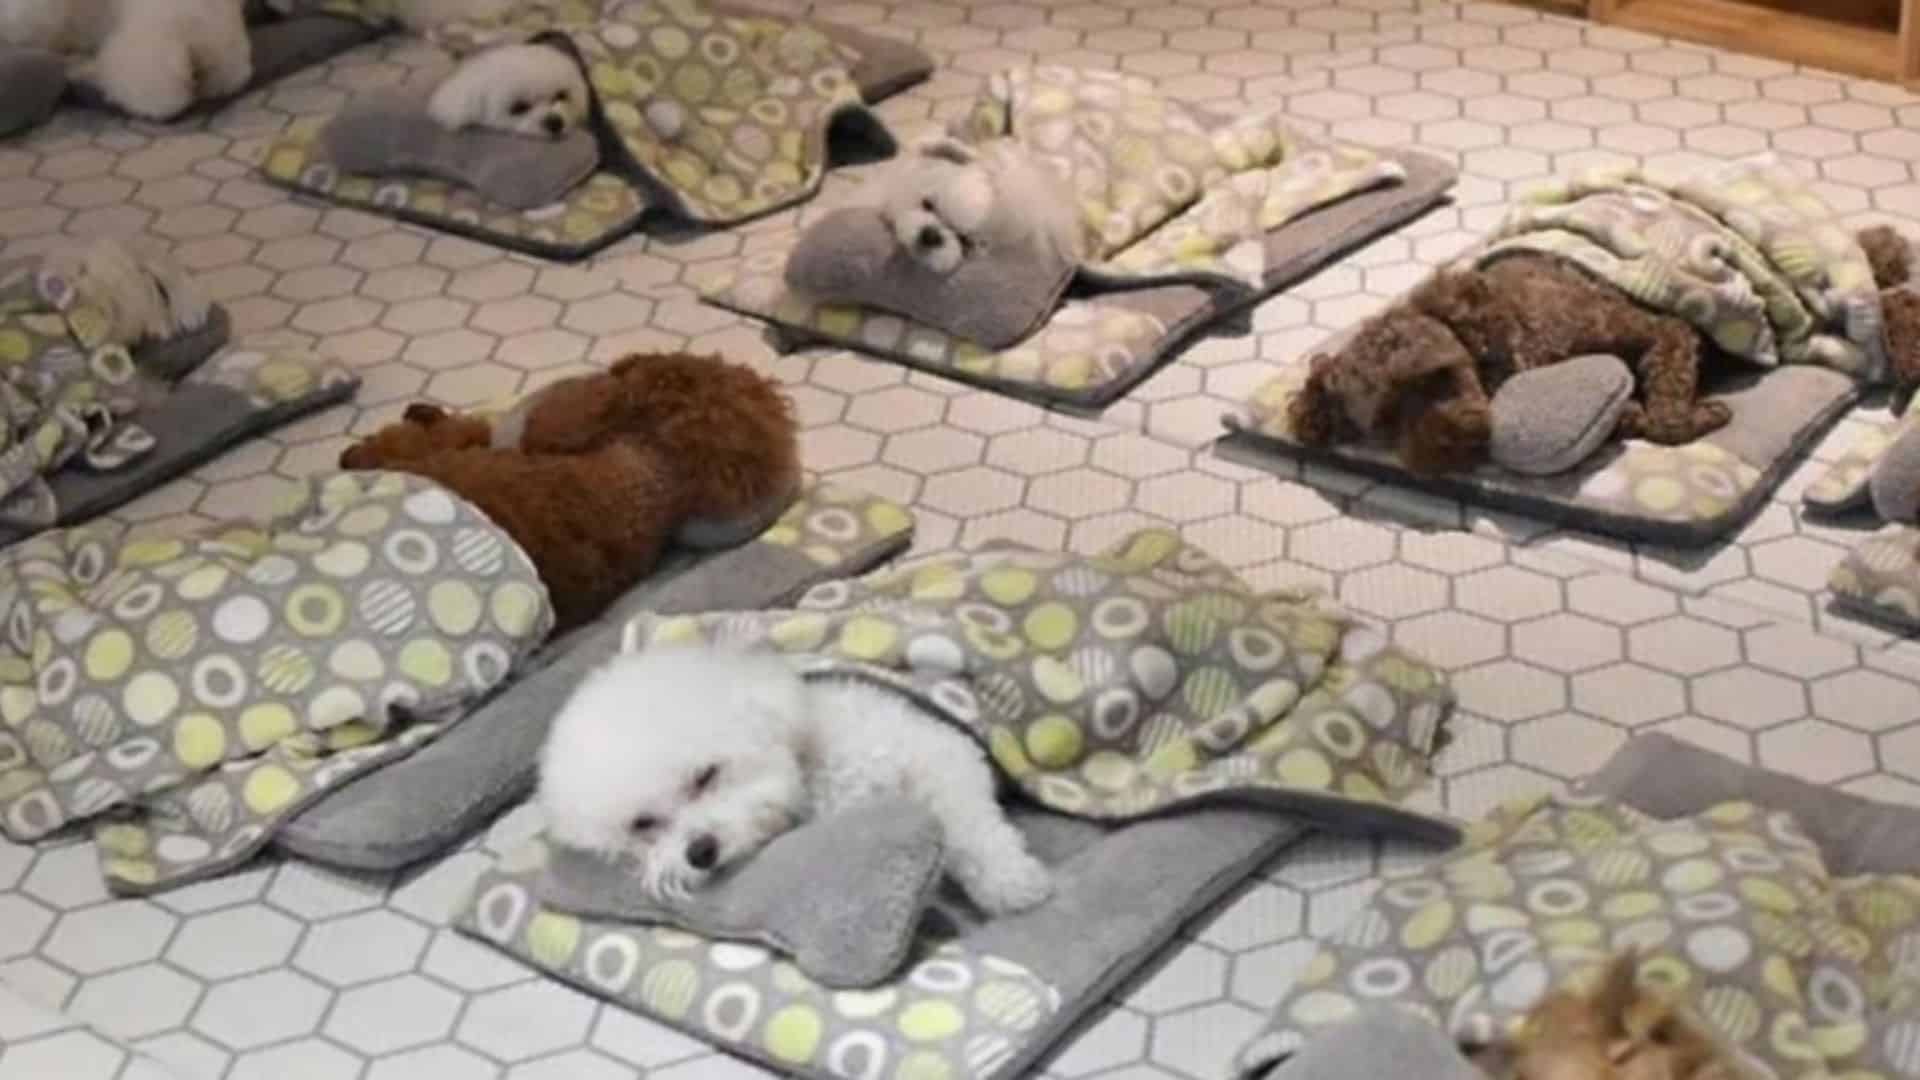 Puppies Napping In Their Tiny Sleeping Bags In The Best Doggy Daycare Will Warm Your Heart